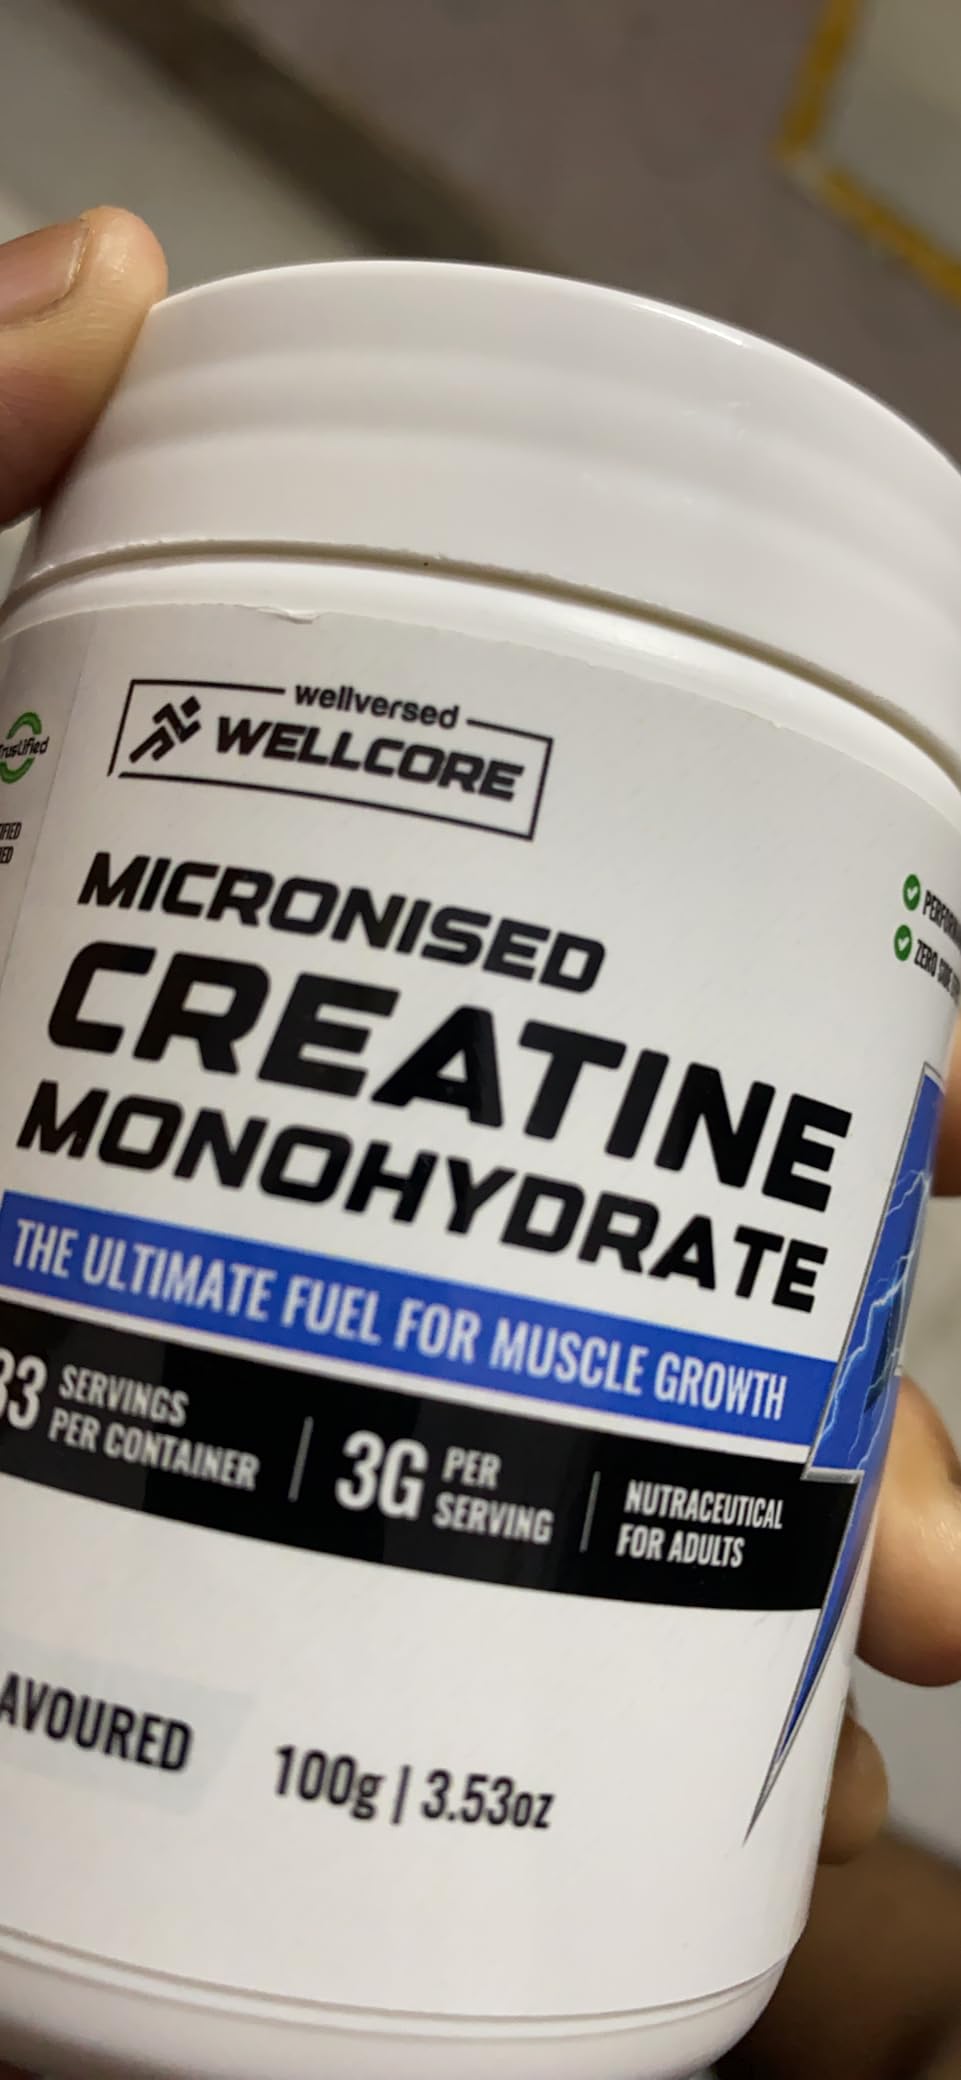 Wellcore - Micronised Creatine Monohydrate (250g, 83 Servings) photo review